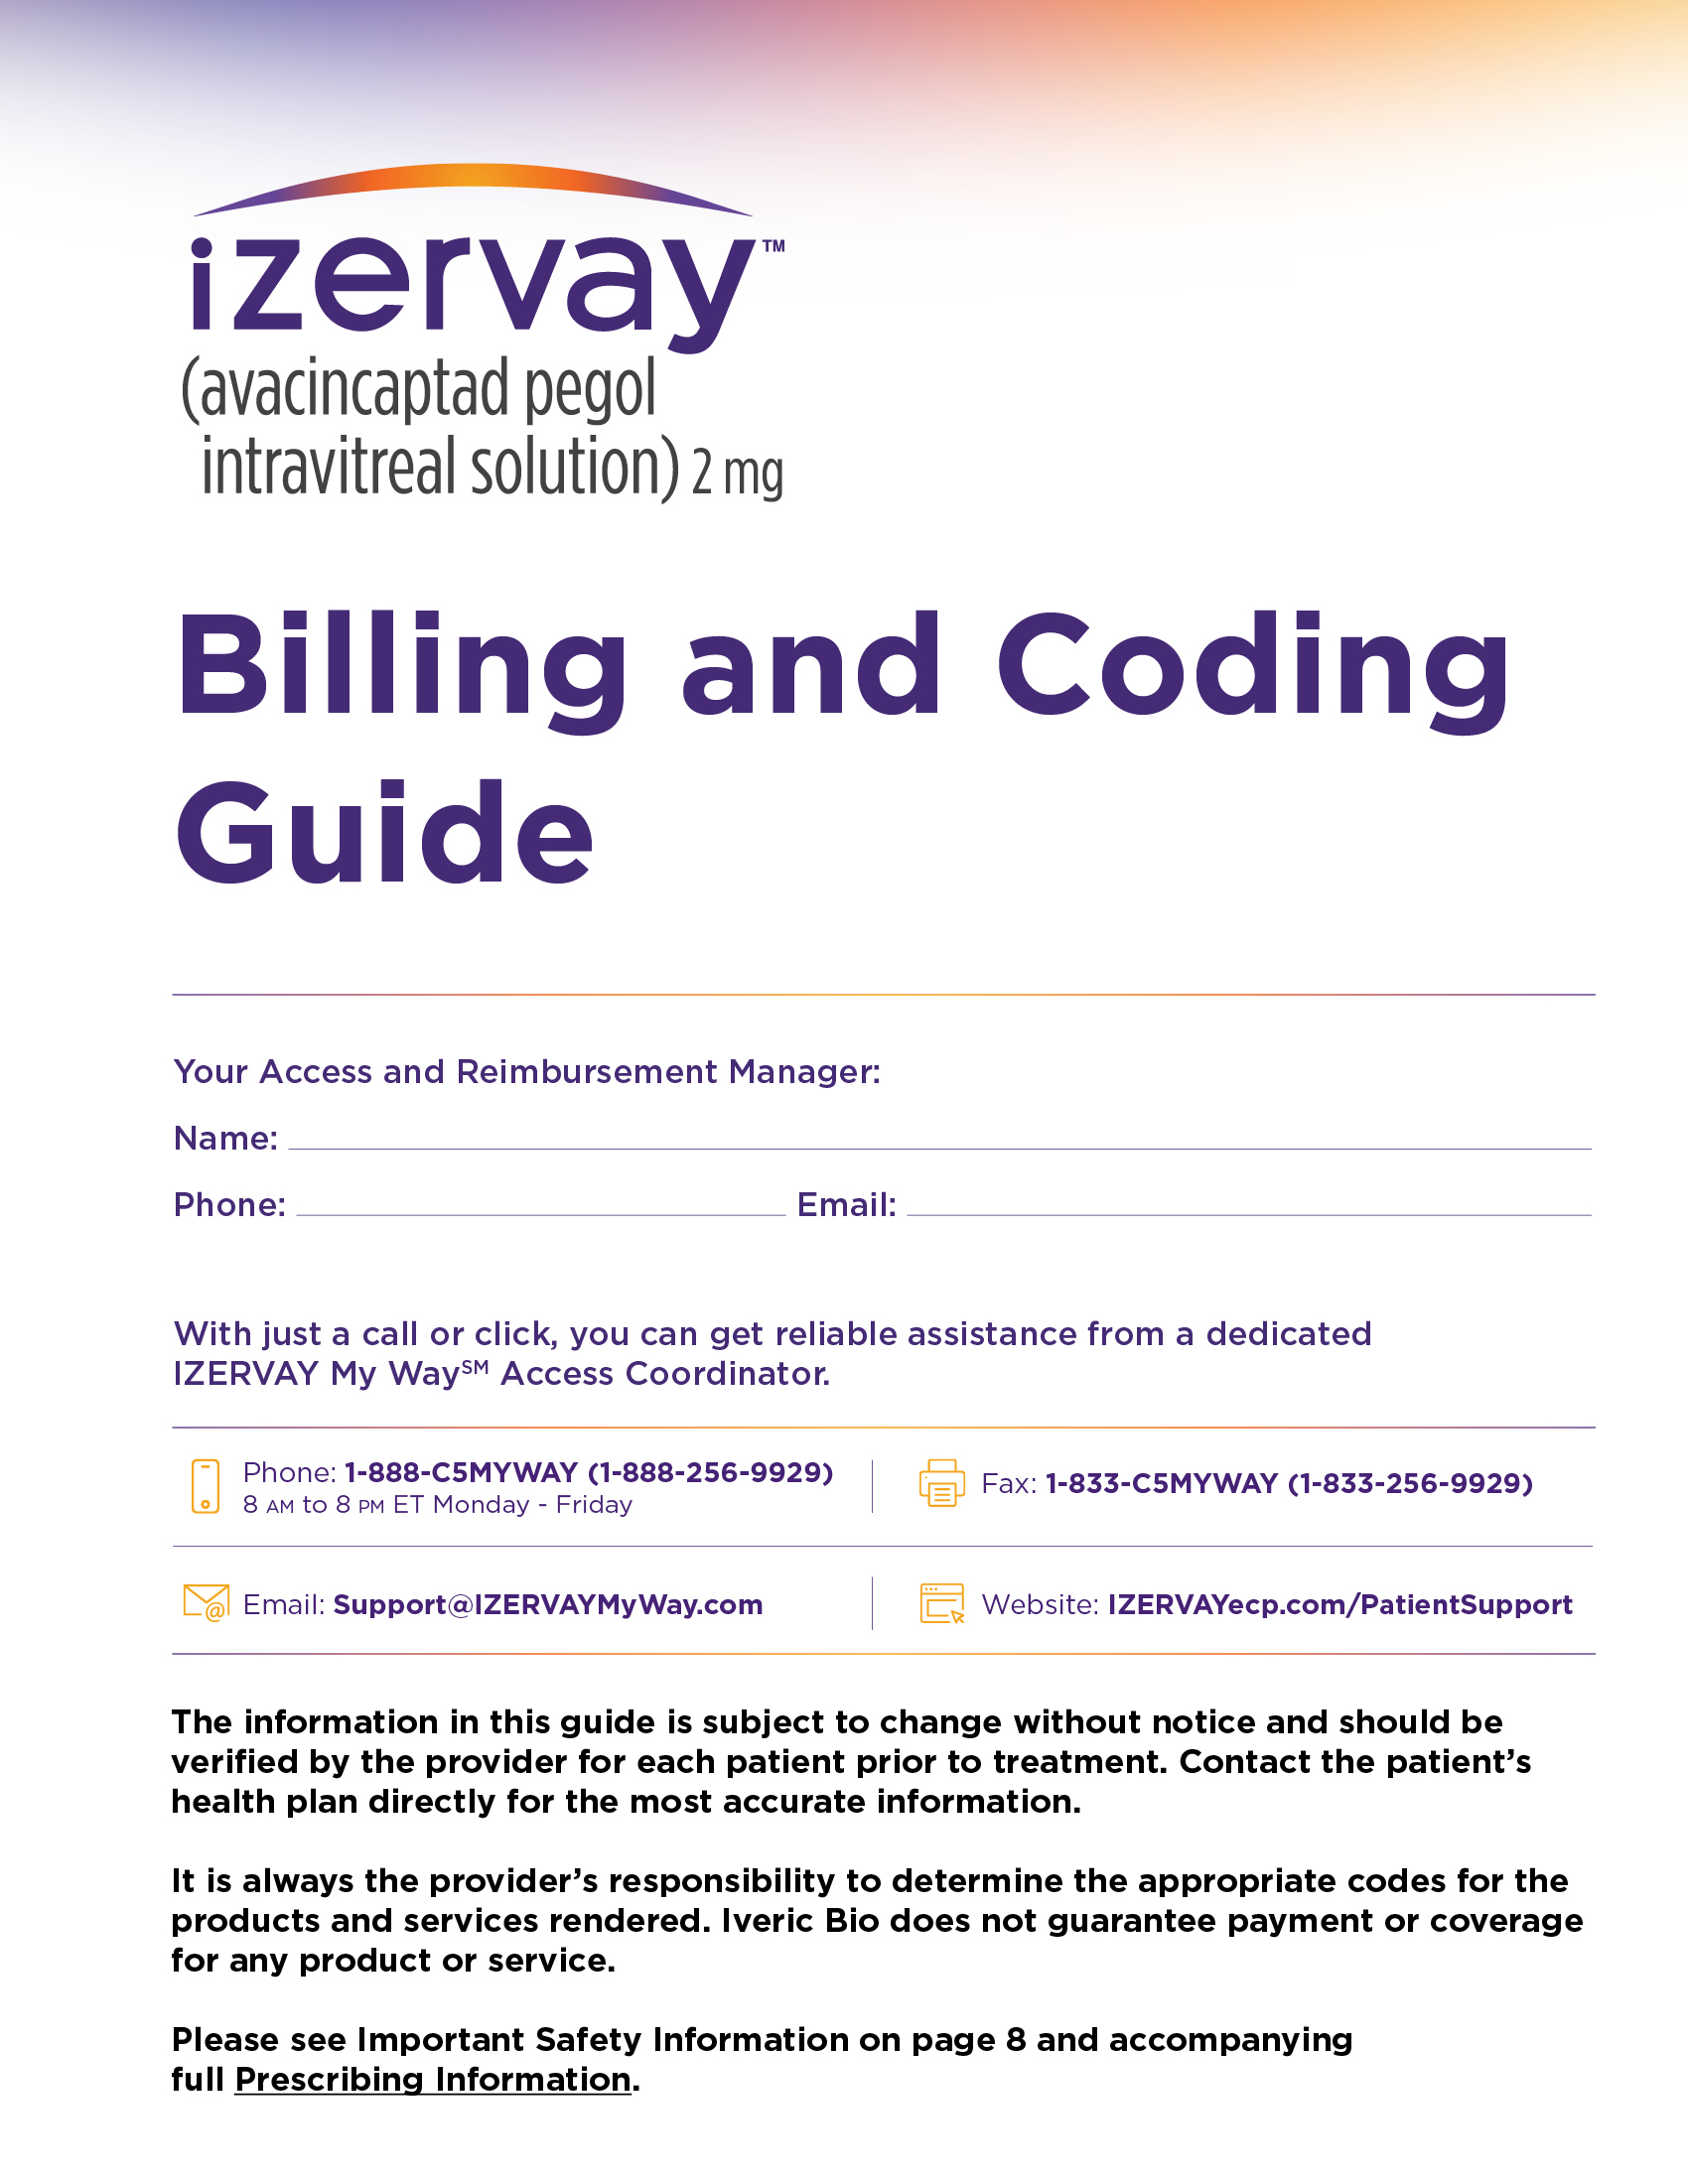 Billing and Coding Guide